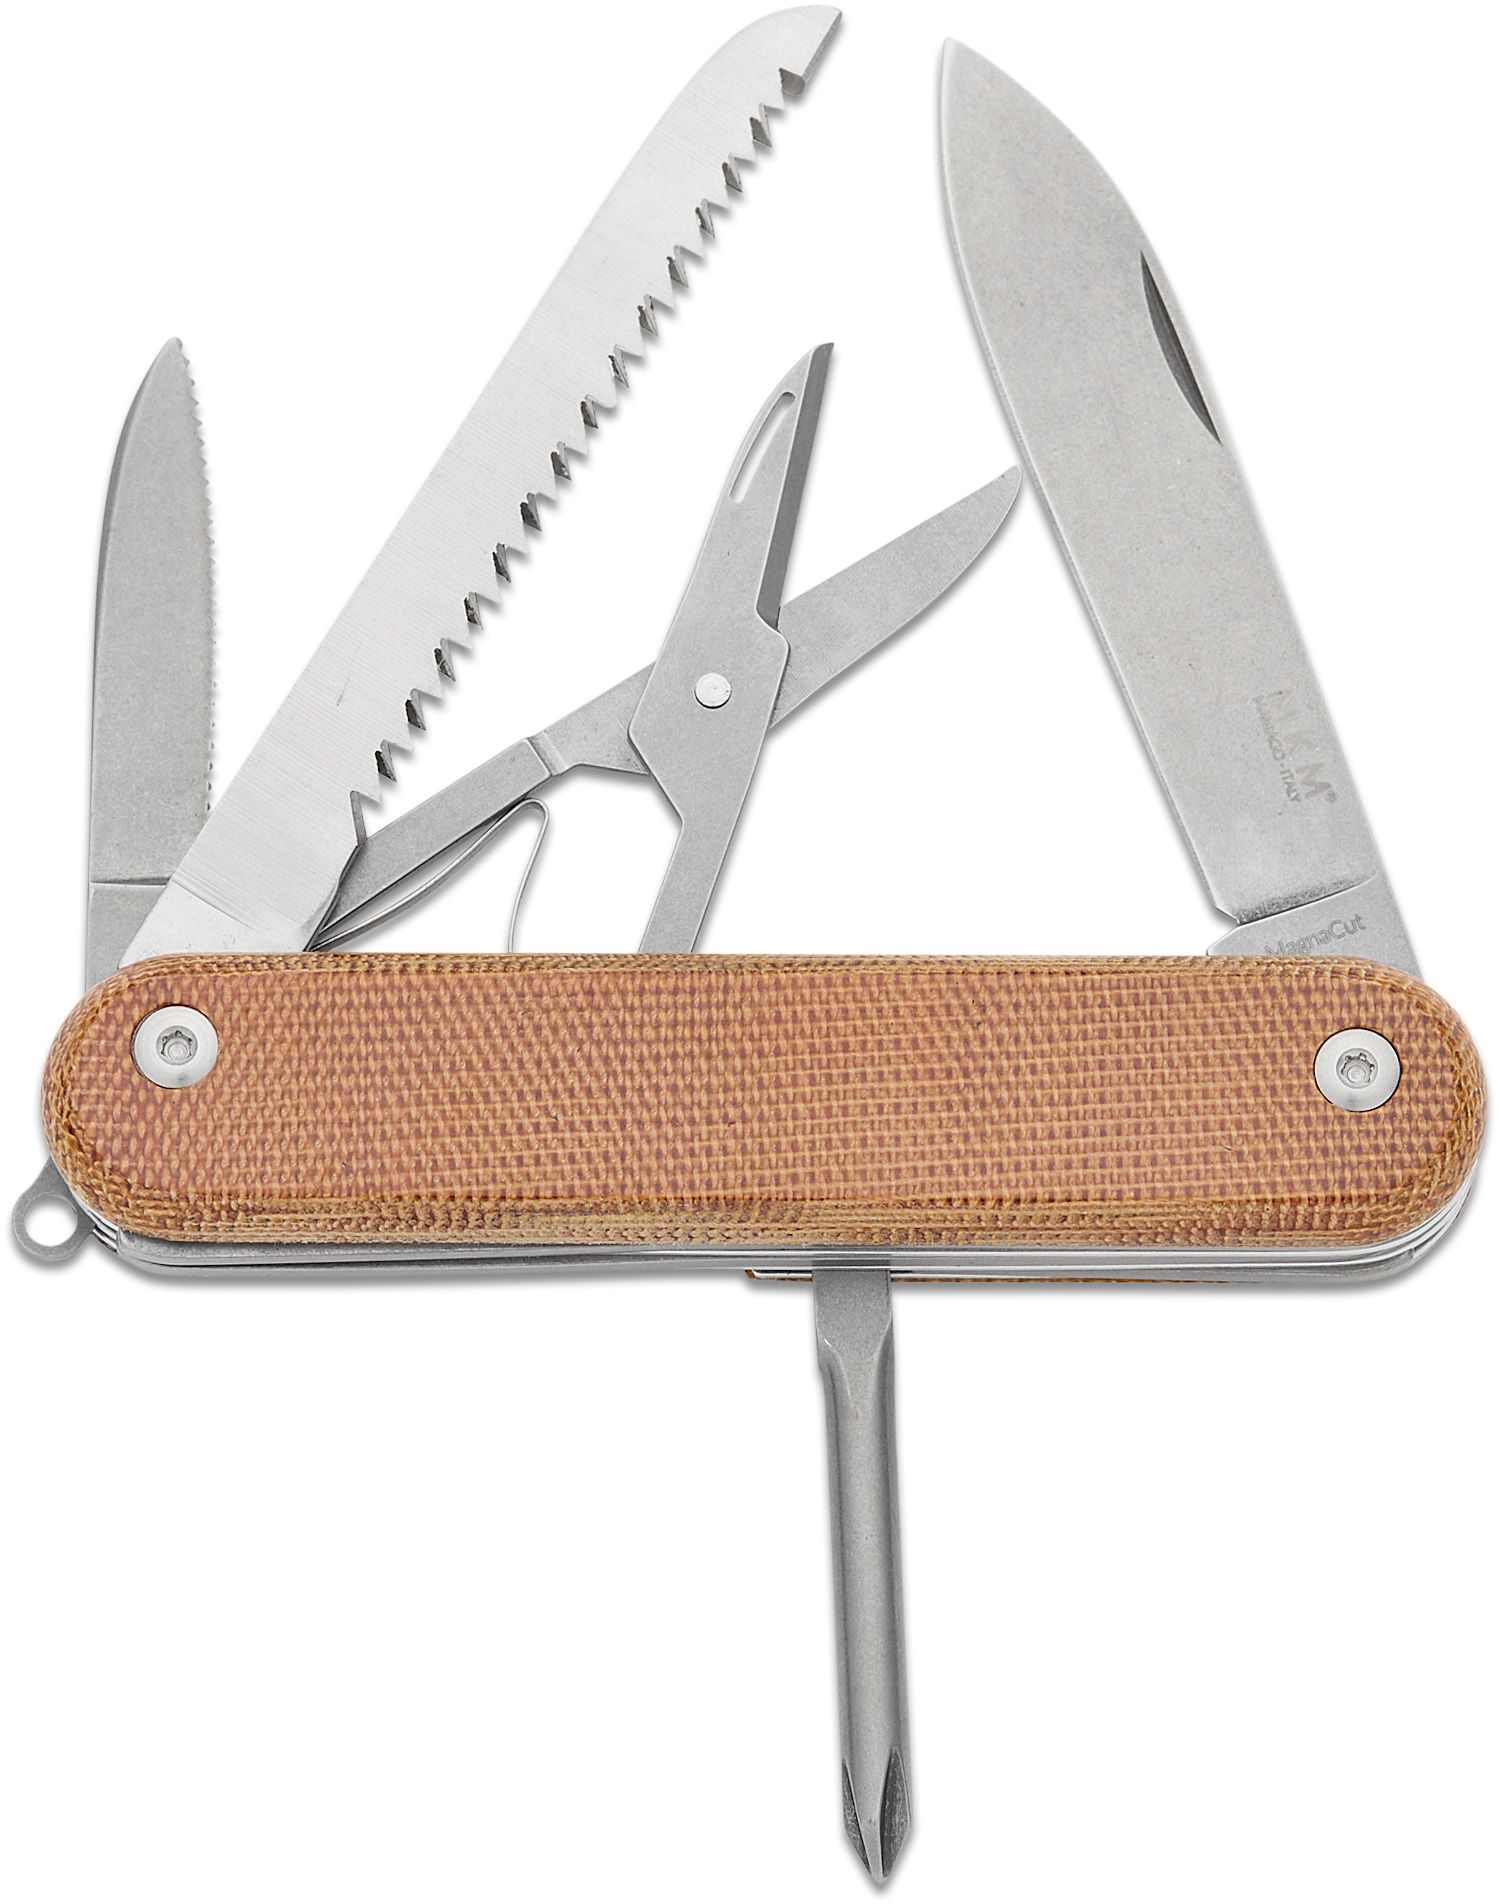 CCM - EMBROIDERY SCISSOR - MKM Online Store - Maniago Knife Makers